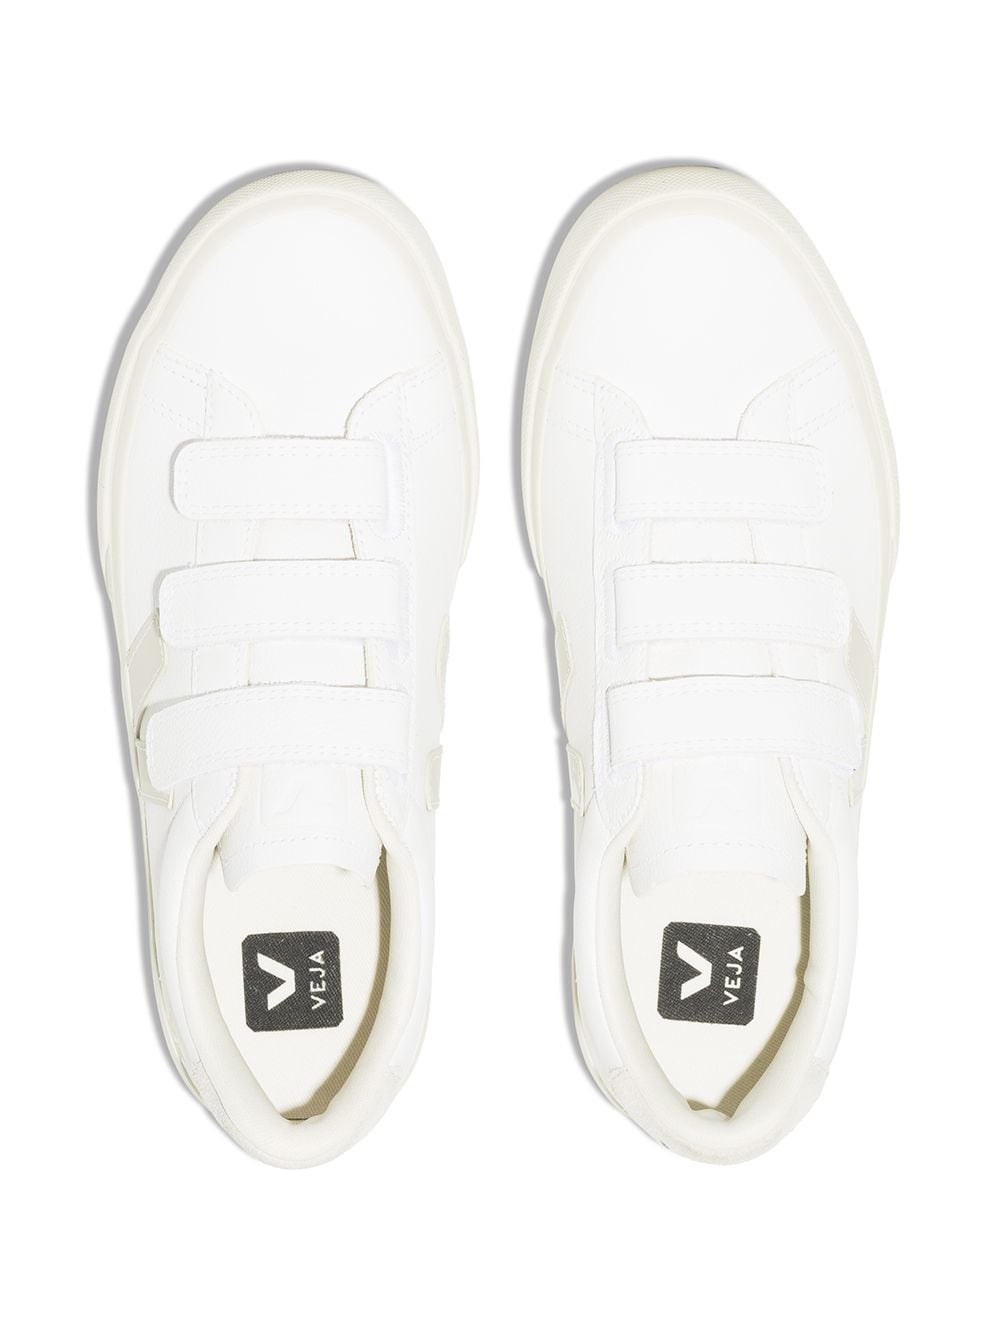 Shop VEJA Recife low-top sneakers with Express Delivery - FARFETCH